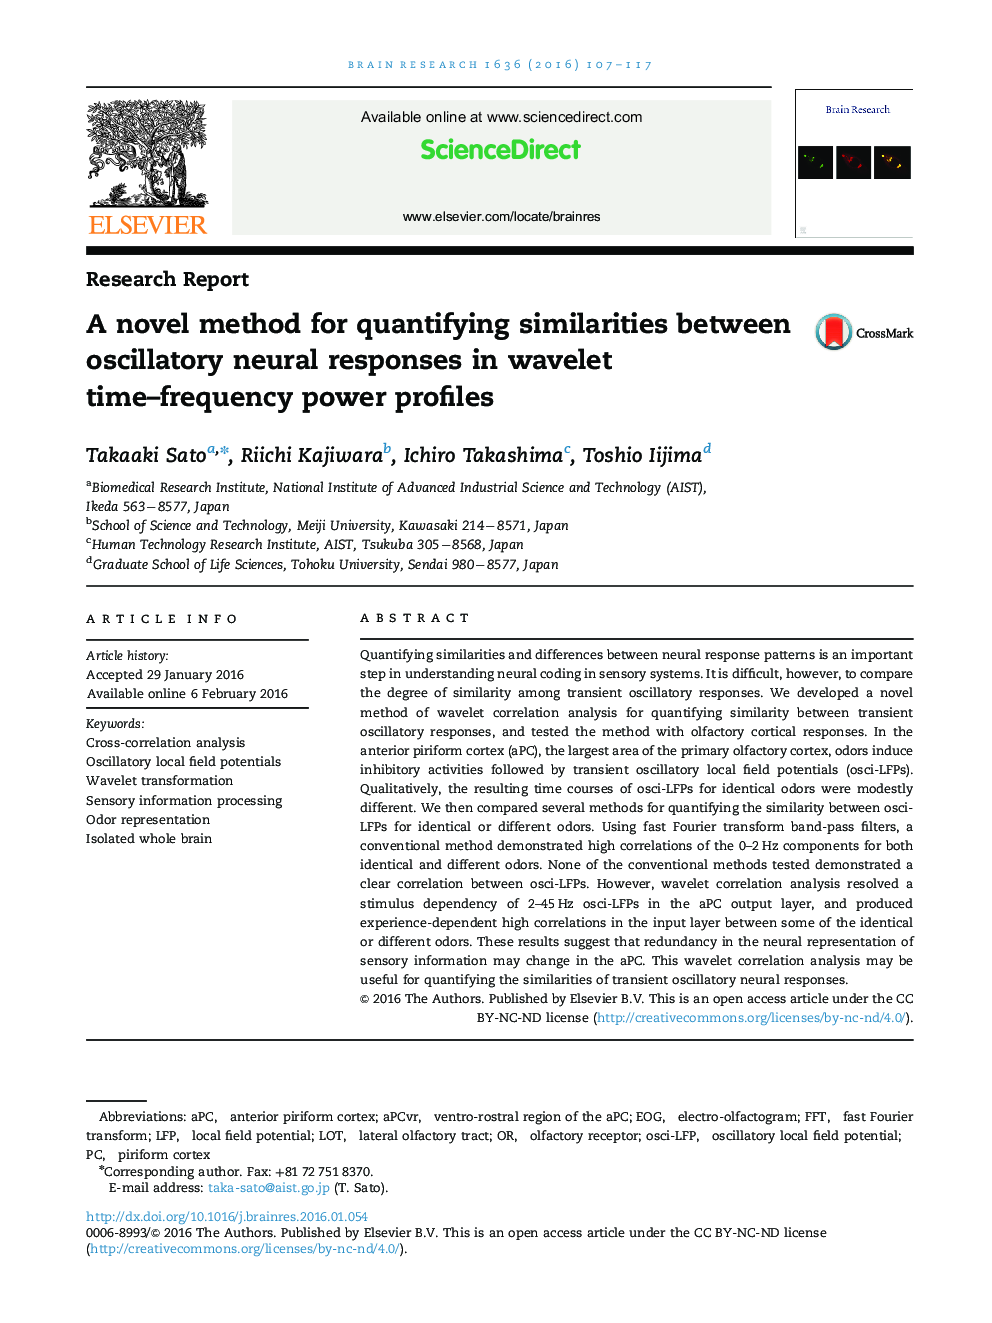 Research ReportA novel method for quantifying similarities between oscillatory neural responses in wavelet time-frequency power profiles